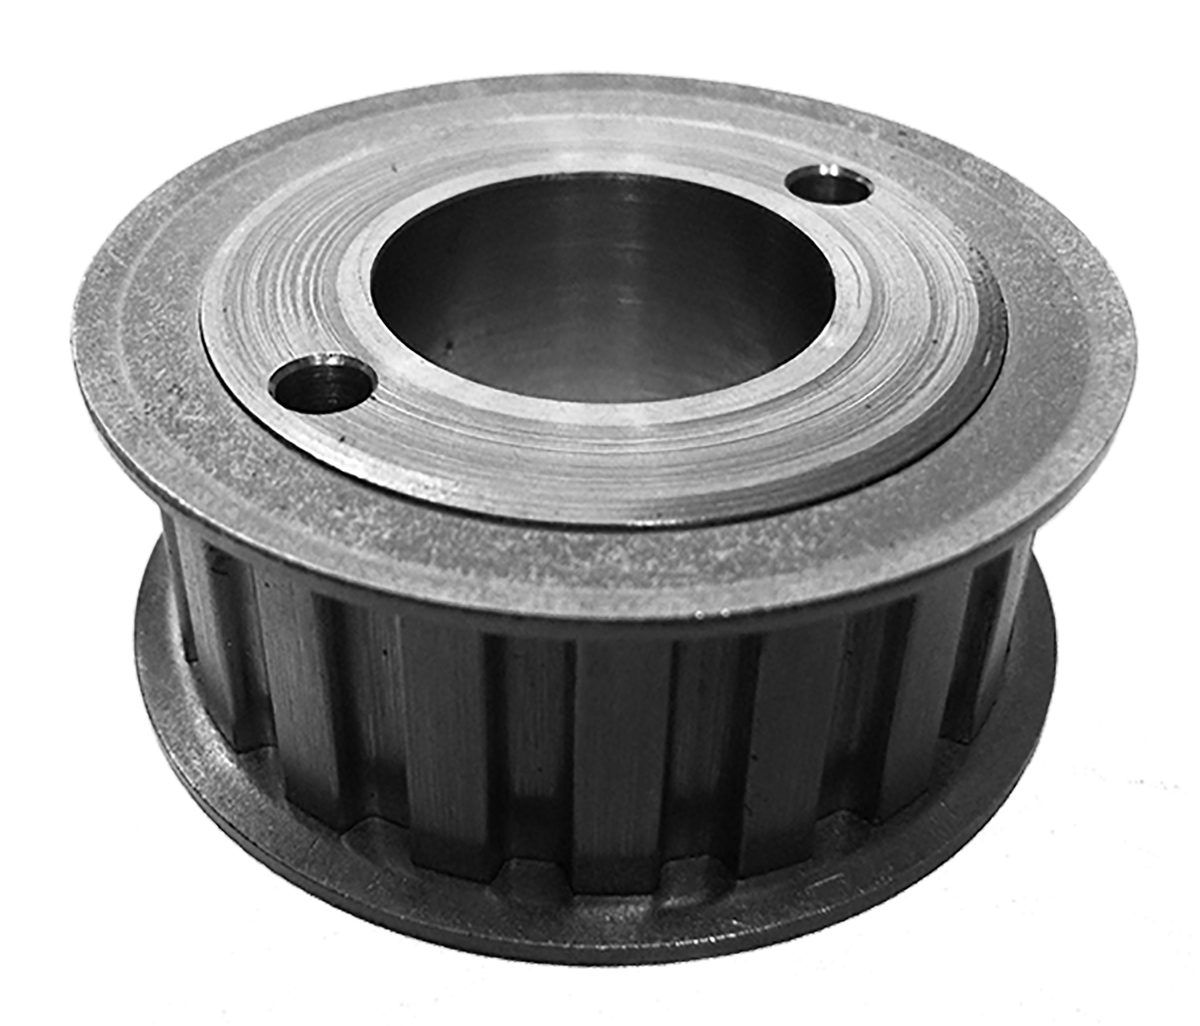 40LH075 - Cast Iron Imperial Pitch Pulleys